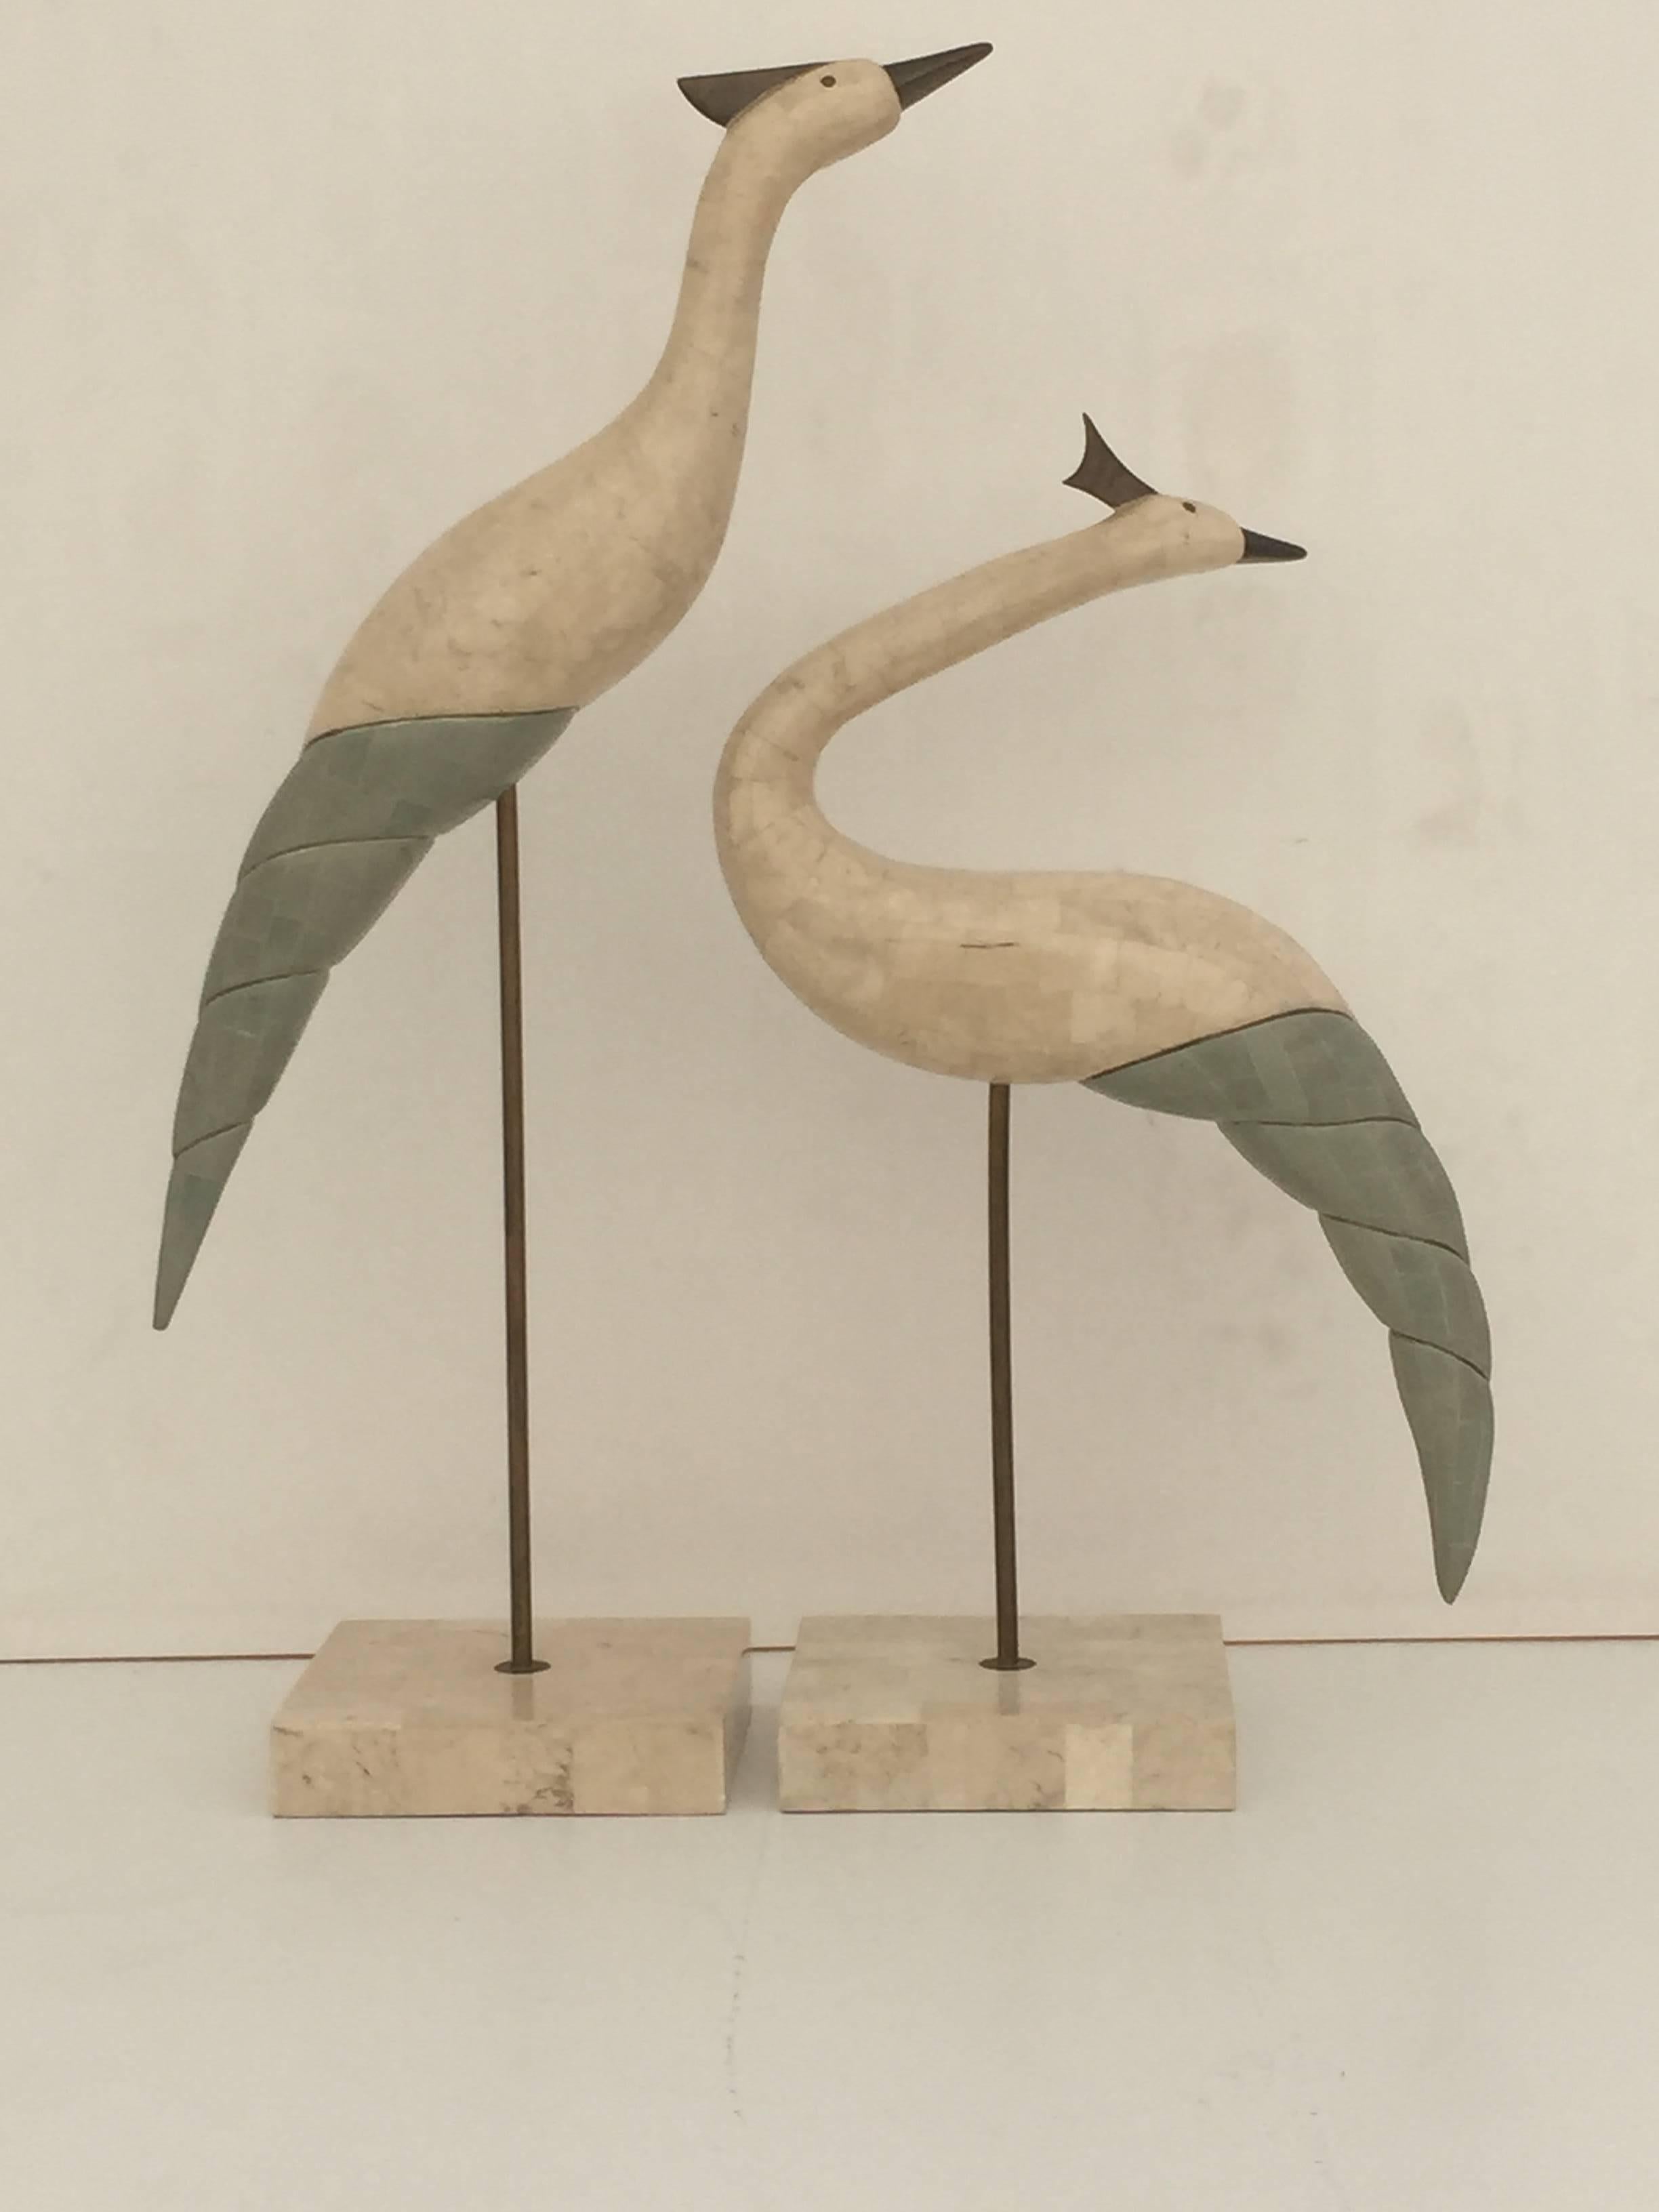 Tessellated stone and brass bird sculptures.
Size shown is for the large one.
Measures: Small bird is 24